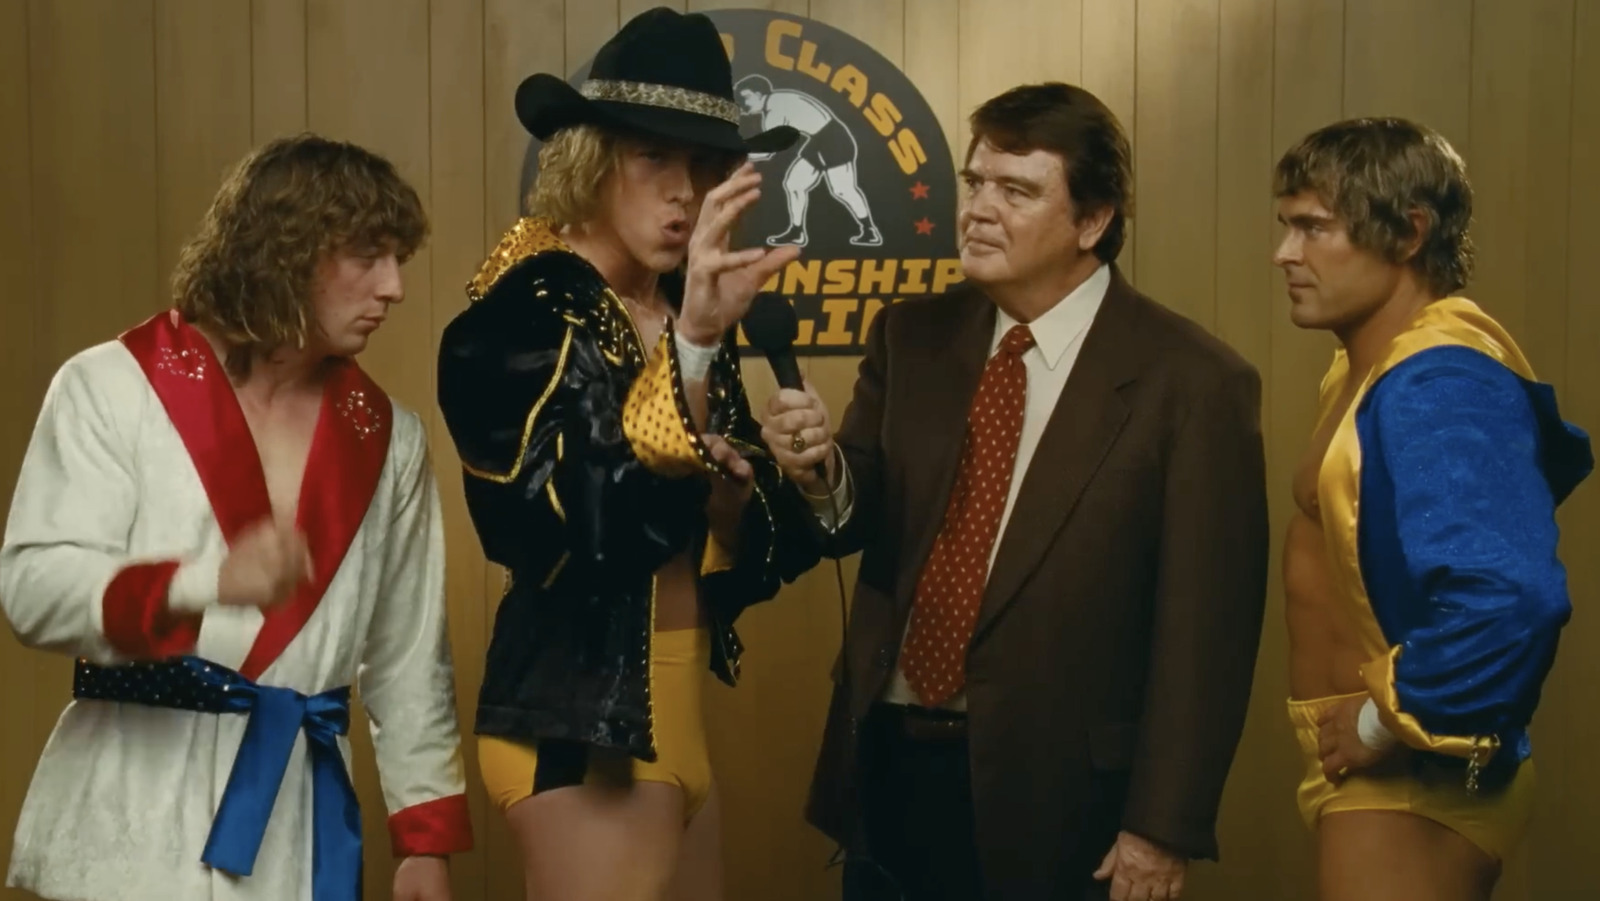 The Iron Claw: Why A Tragic Von Erich Brother Was Cut From The Movie